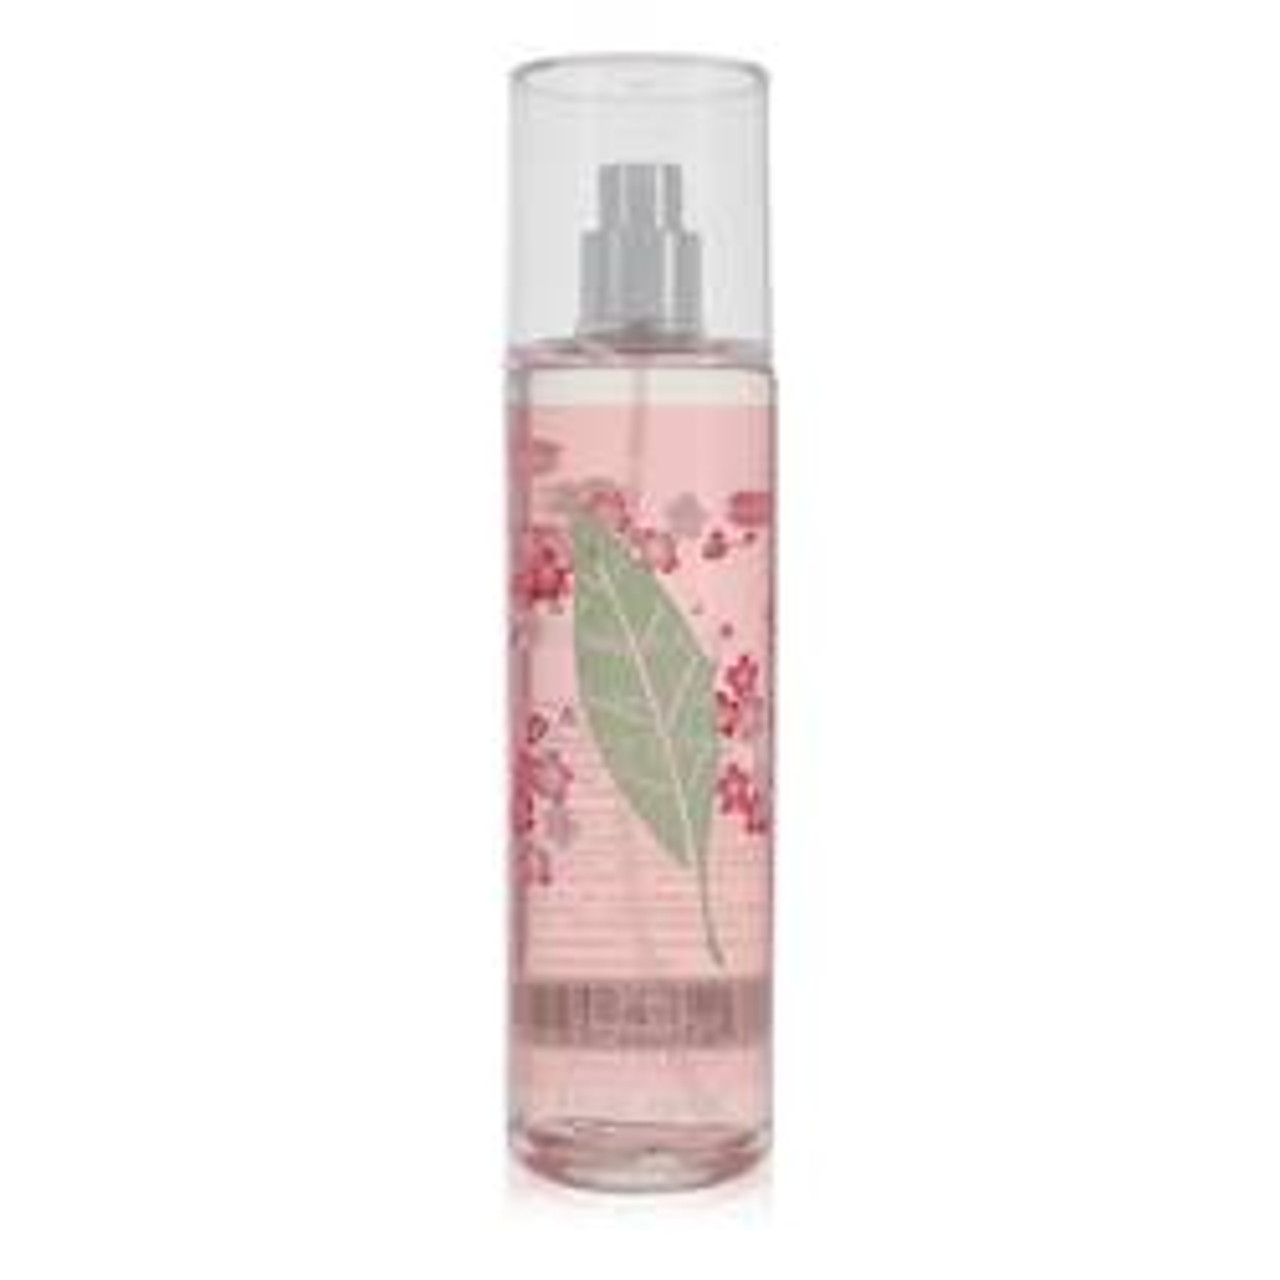 Green Tea Cherry Blossom Perfume By Elizabeth Arden Fine Fragrance Mist 8 oz for Women - [From 39.00 - Choose pk Qty ] - *Ships from Miami